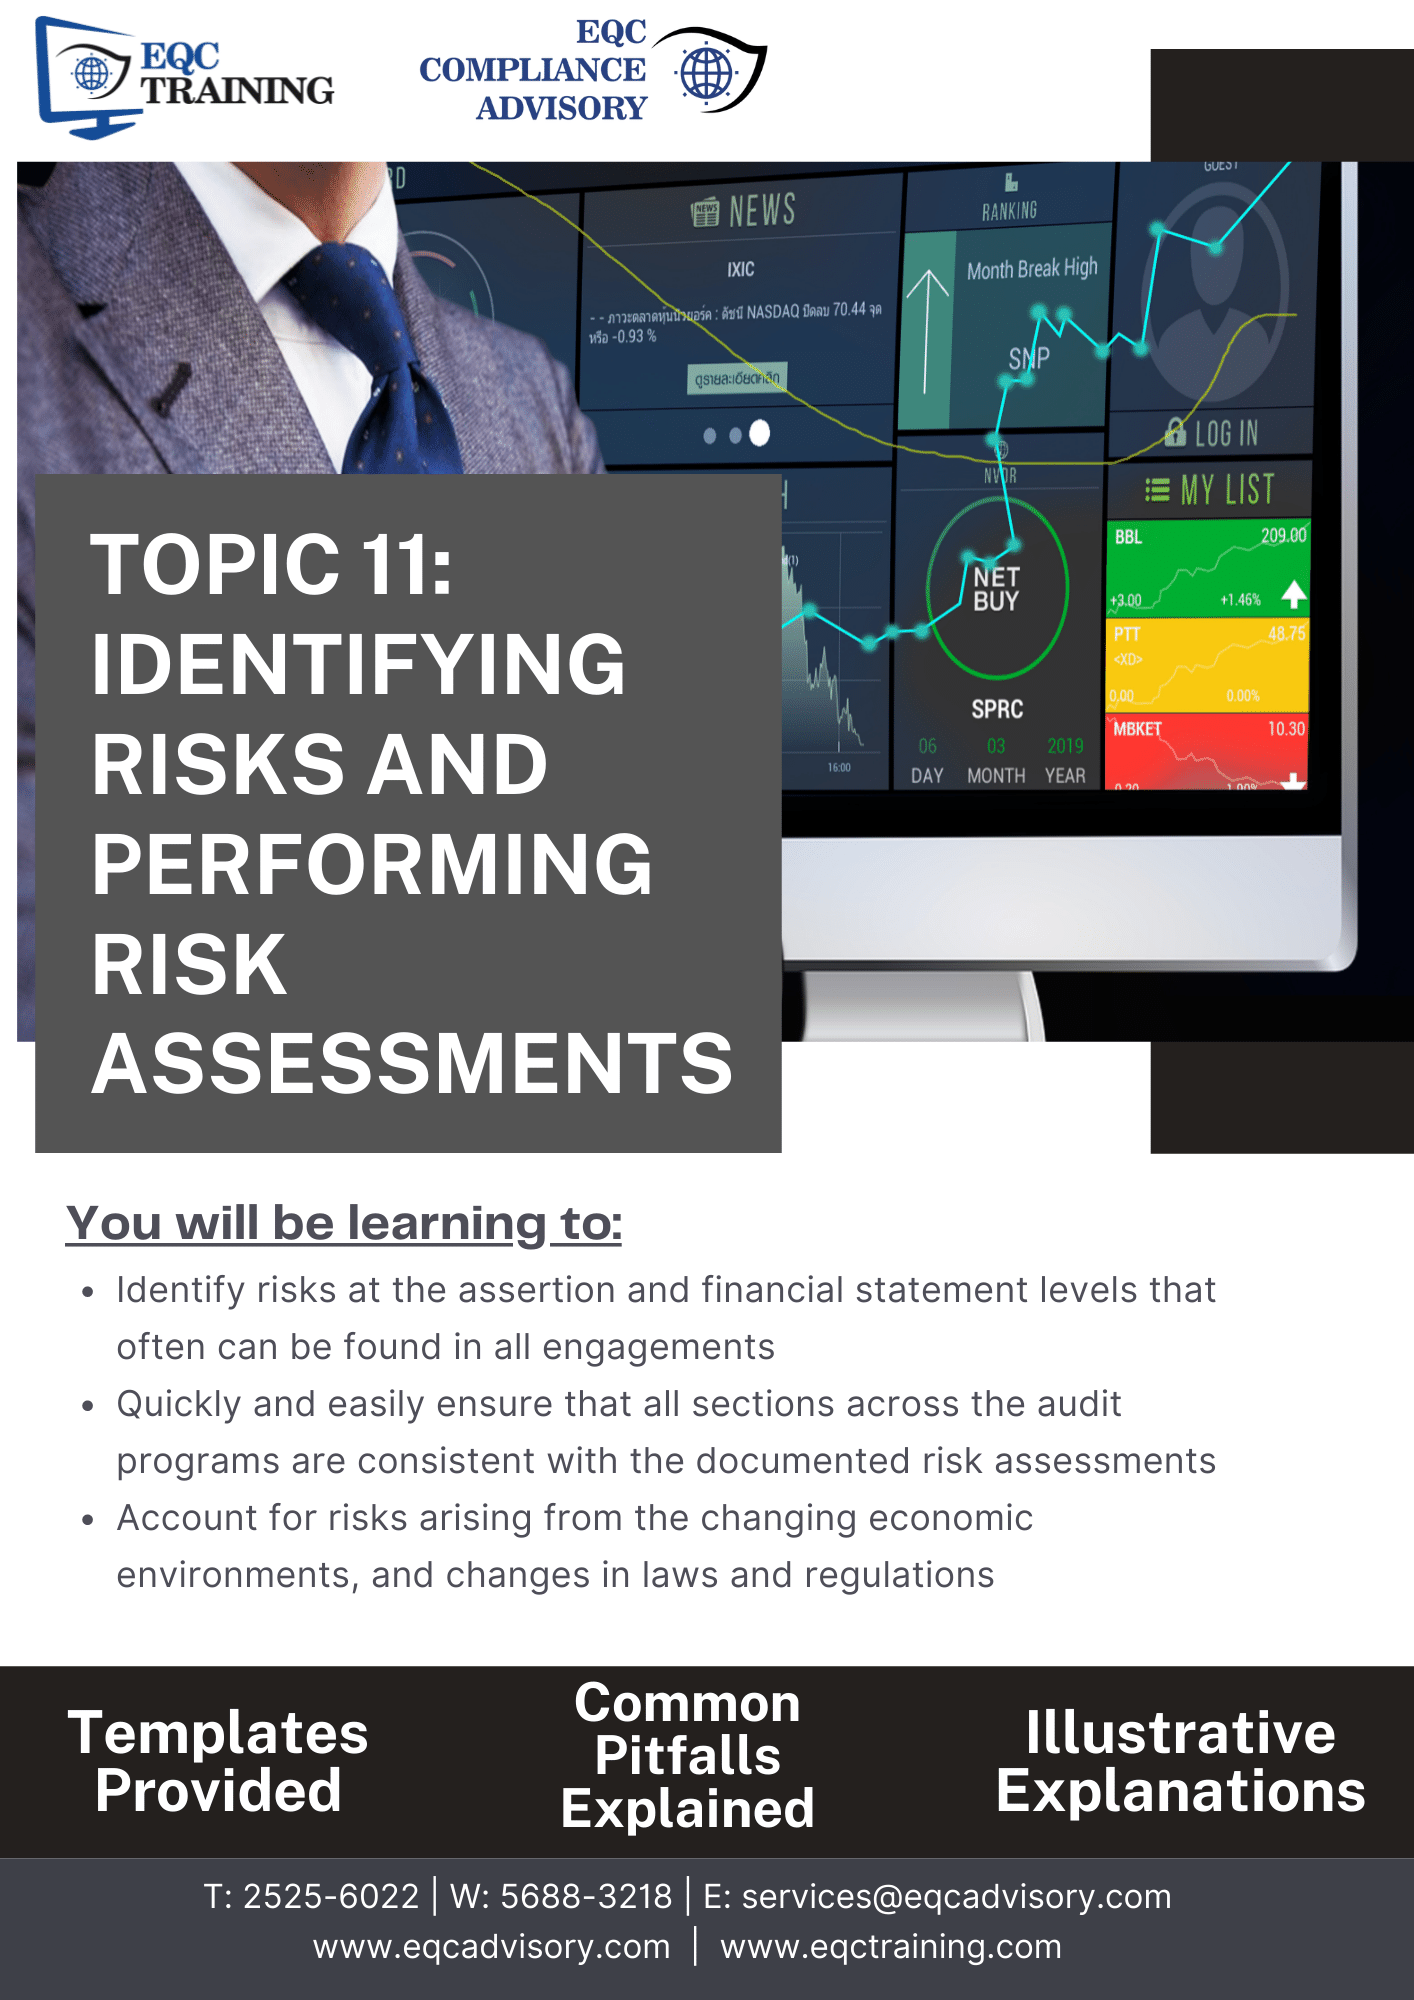 Topic 11 -  Identifying Risks and Performing Risk Assessments